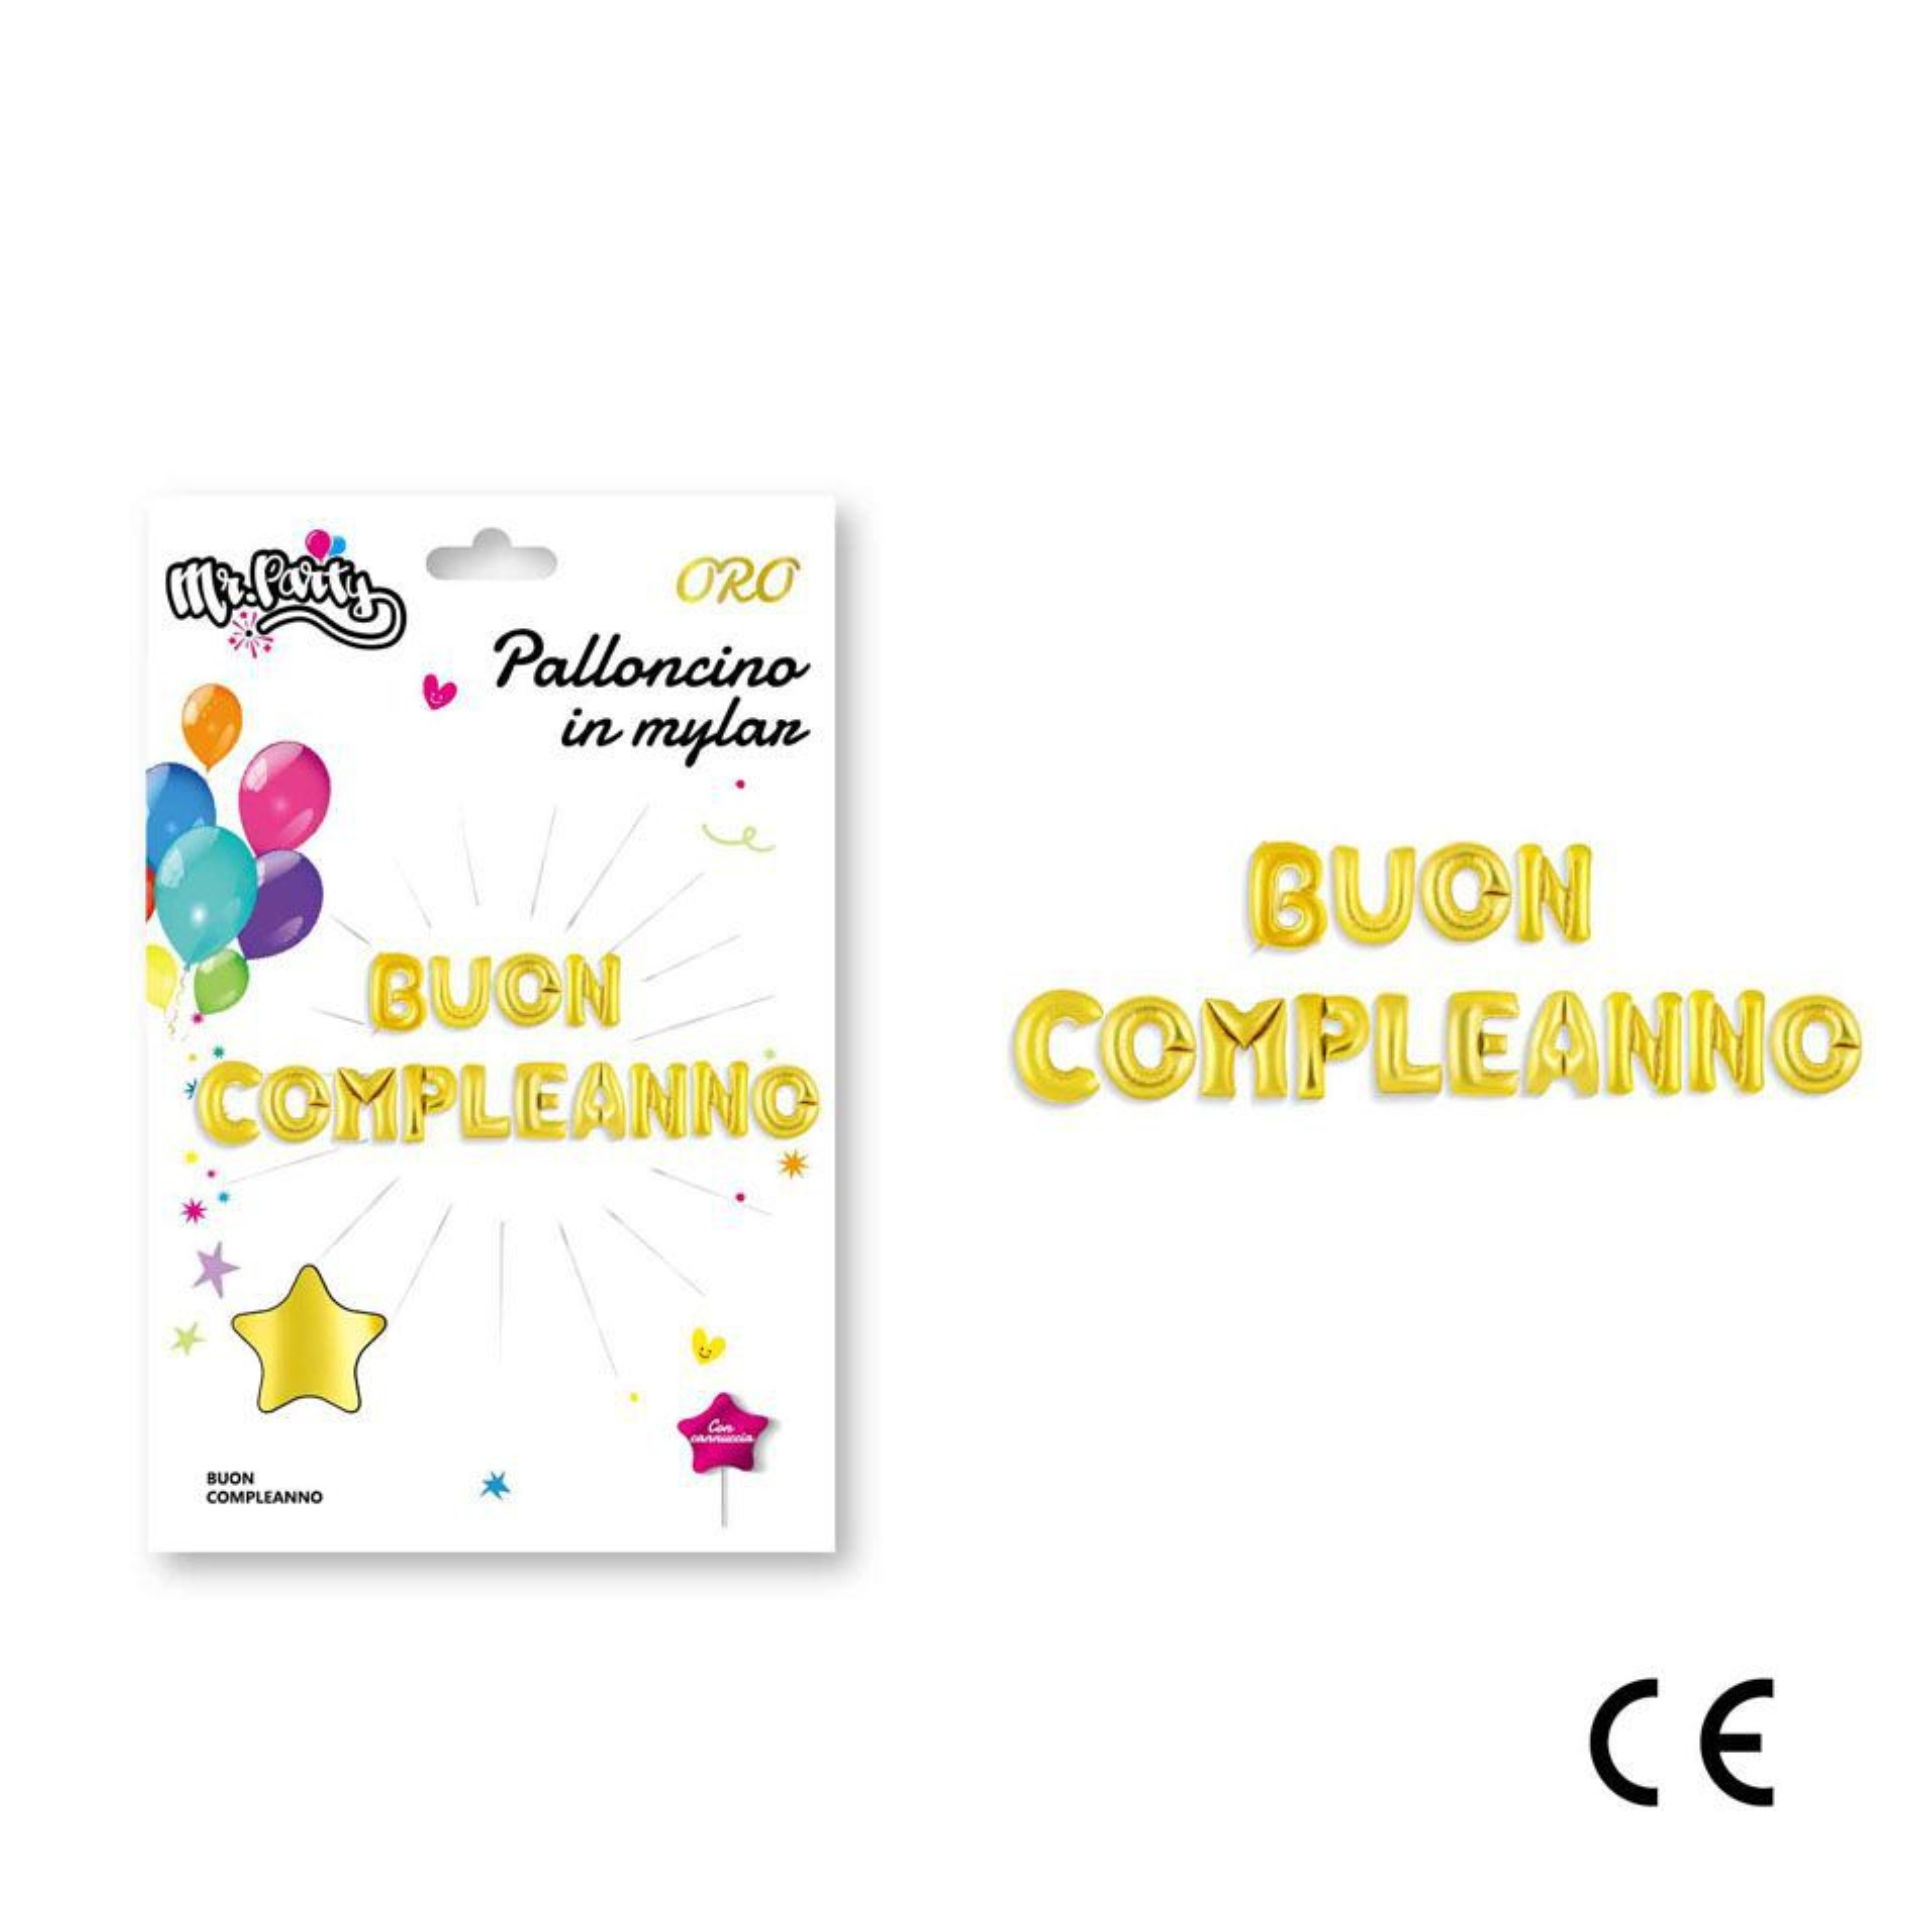 MR.PARTY PALLONCINO MYLAR BUON COMPLEANNO ORODc